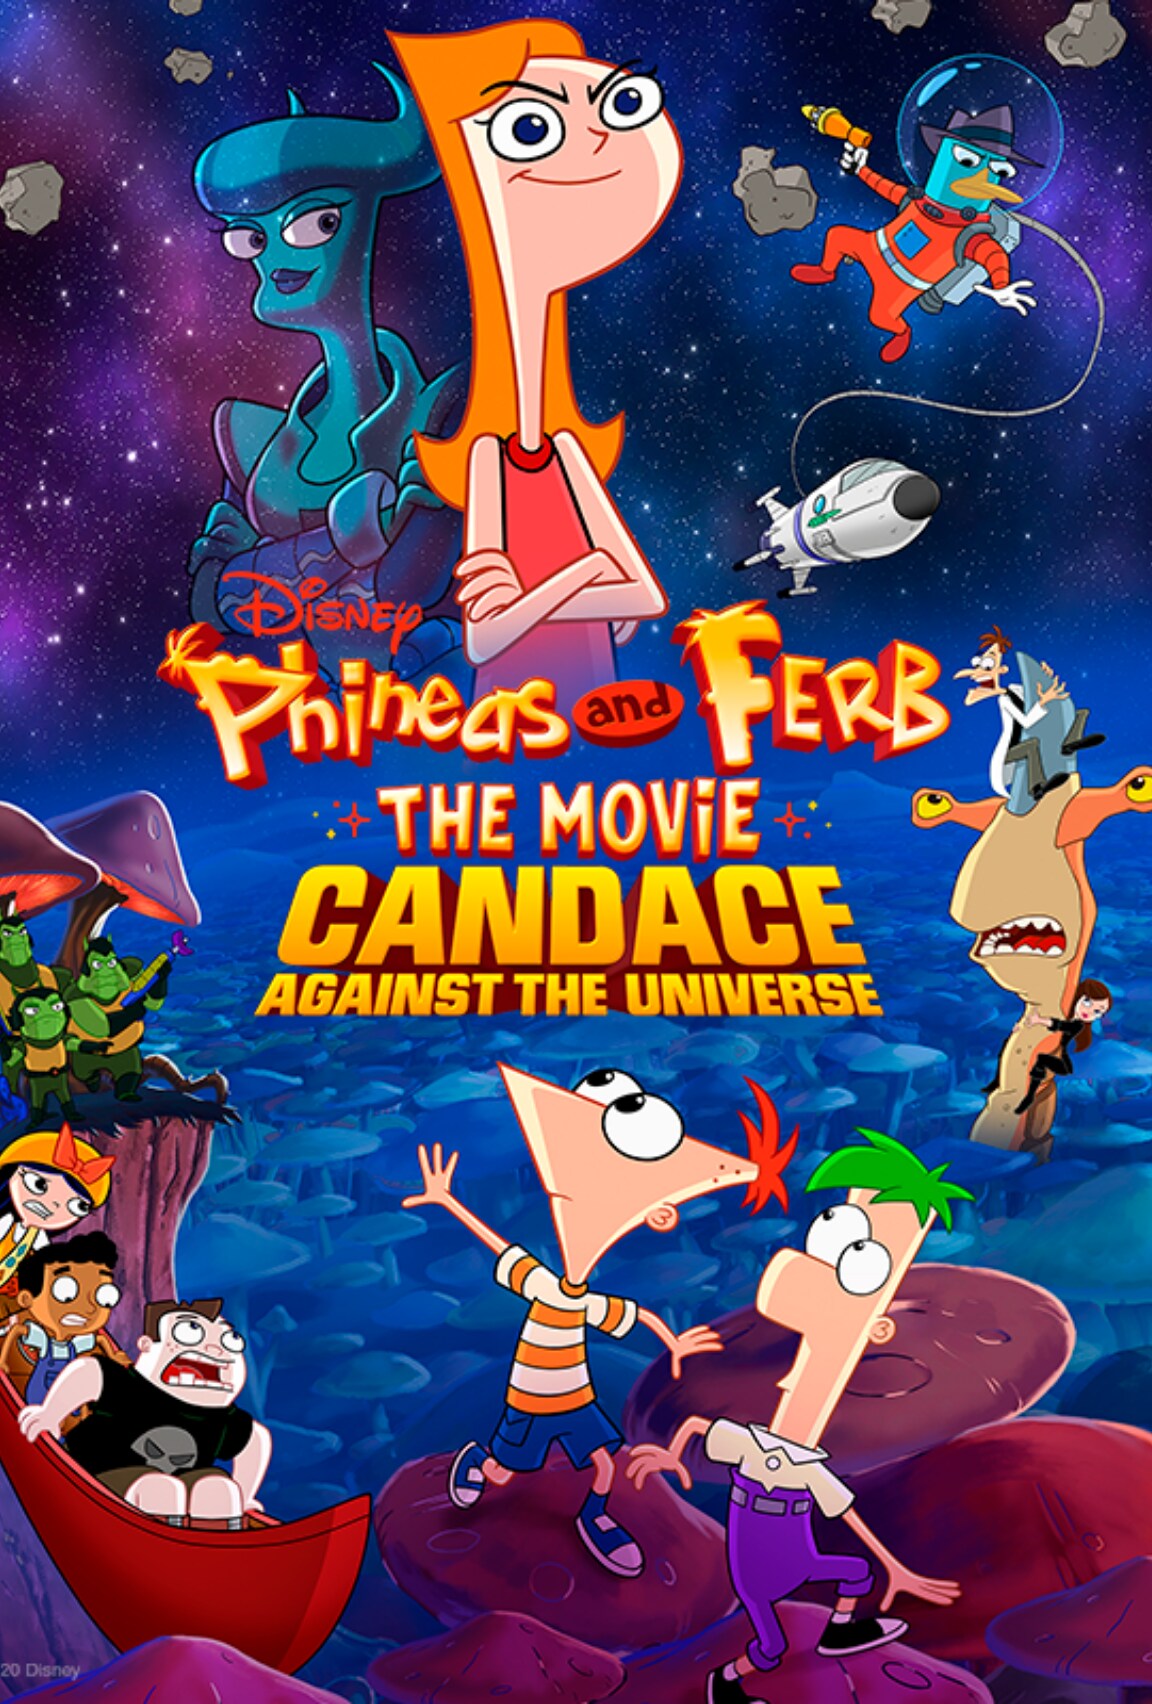 Phineas and Ferb the Movie: Candace Against The Universe (2020)